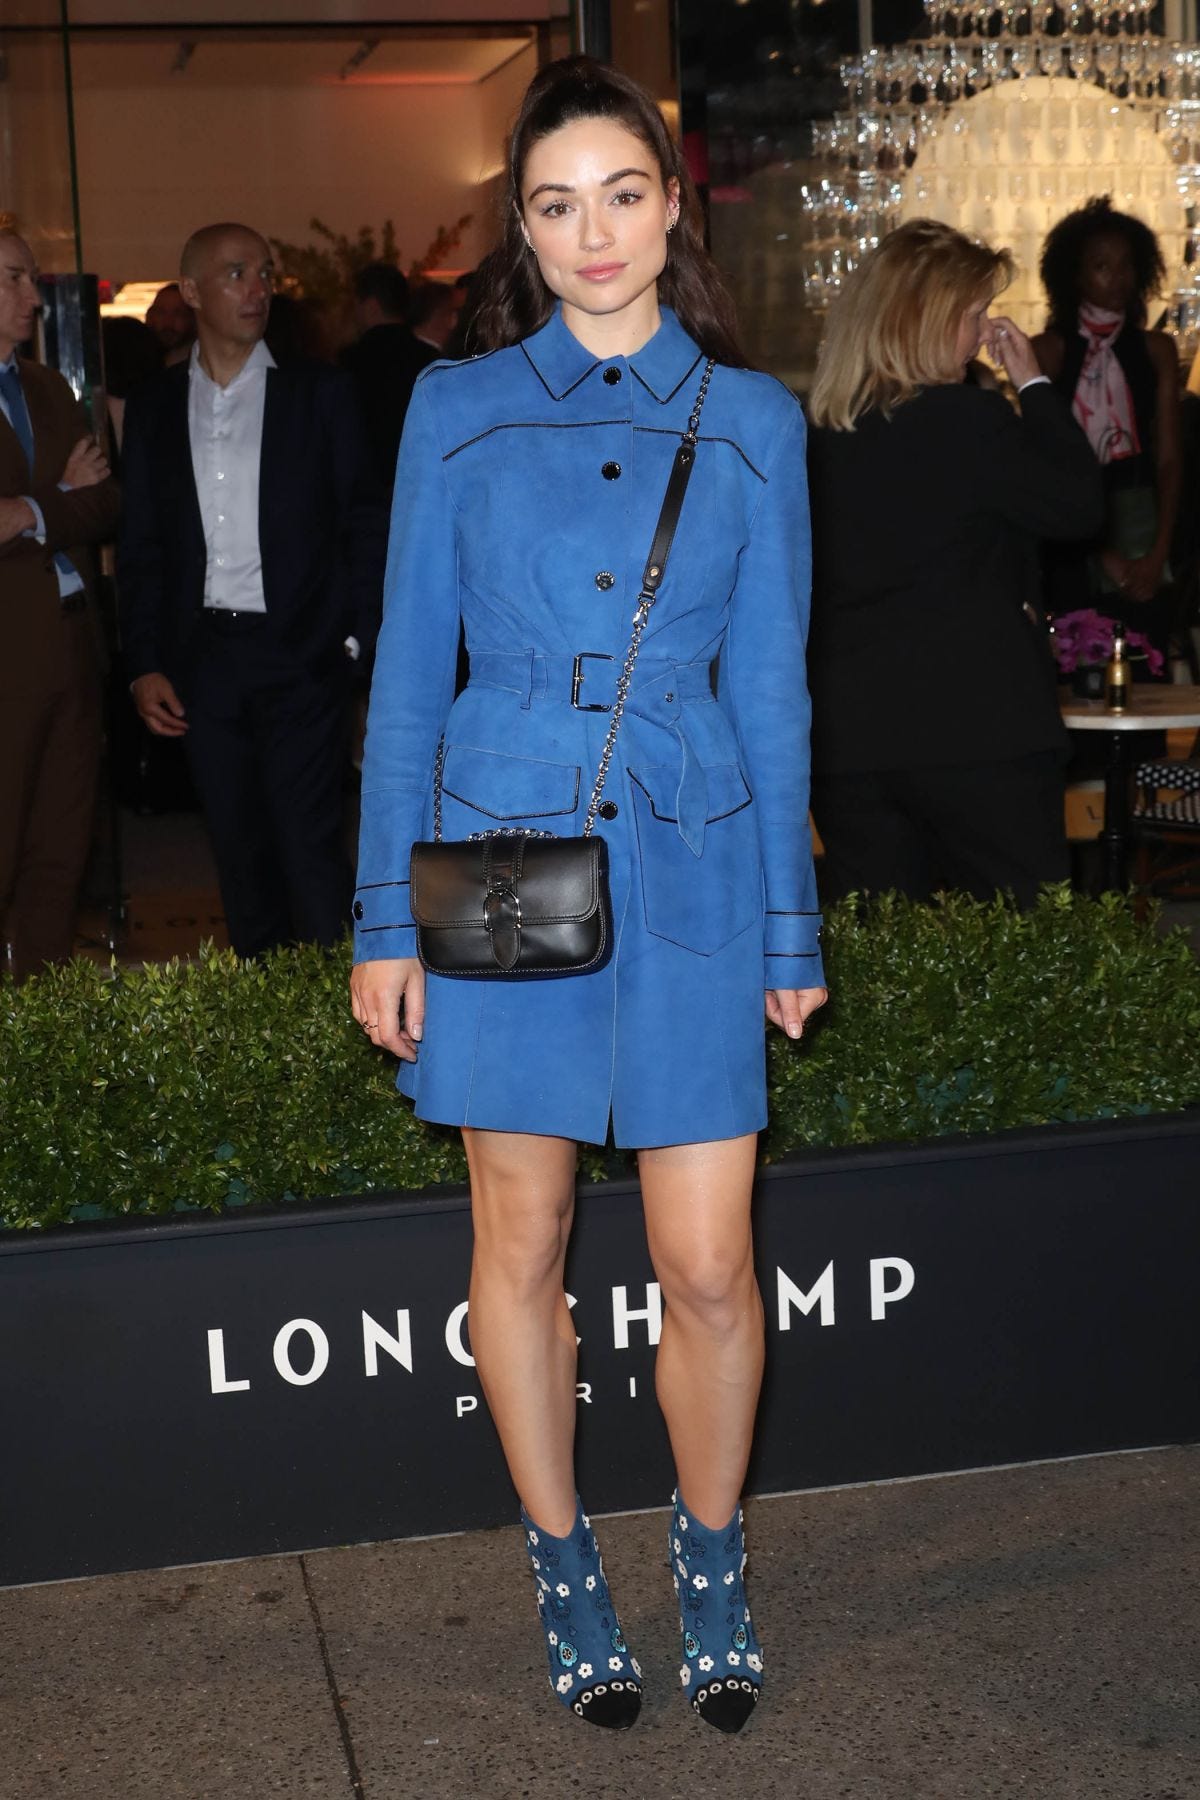 The Longchamp Bags Celebrities Carry Are on Sale at Gilt